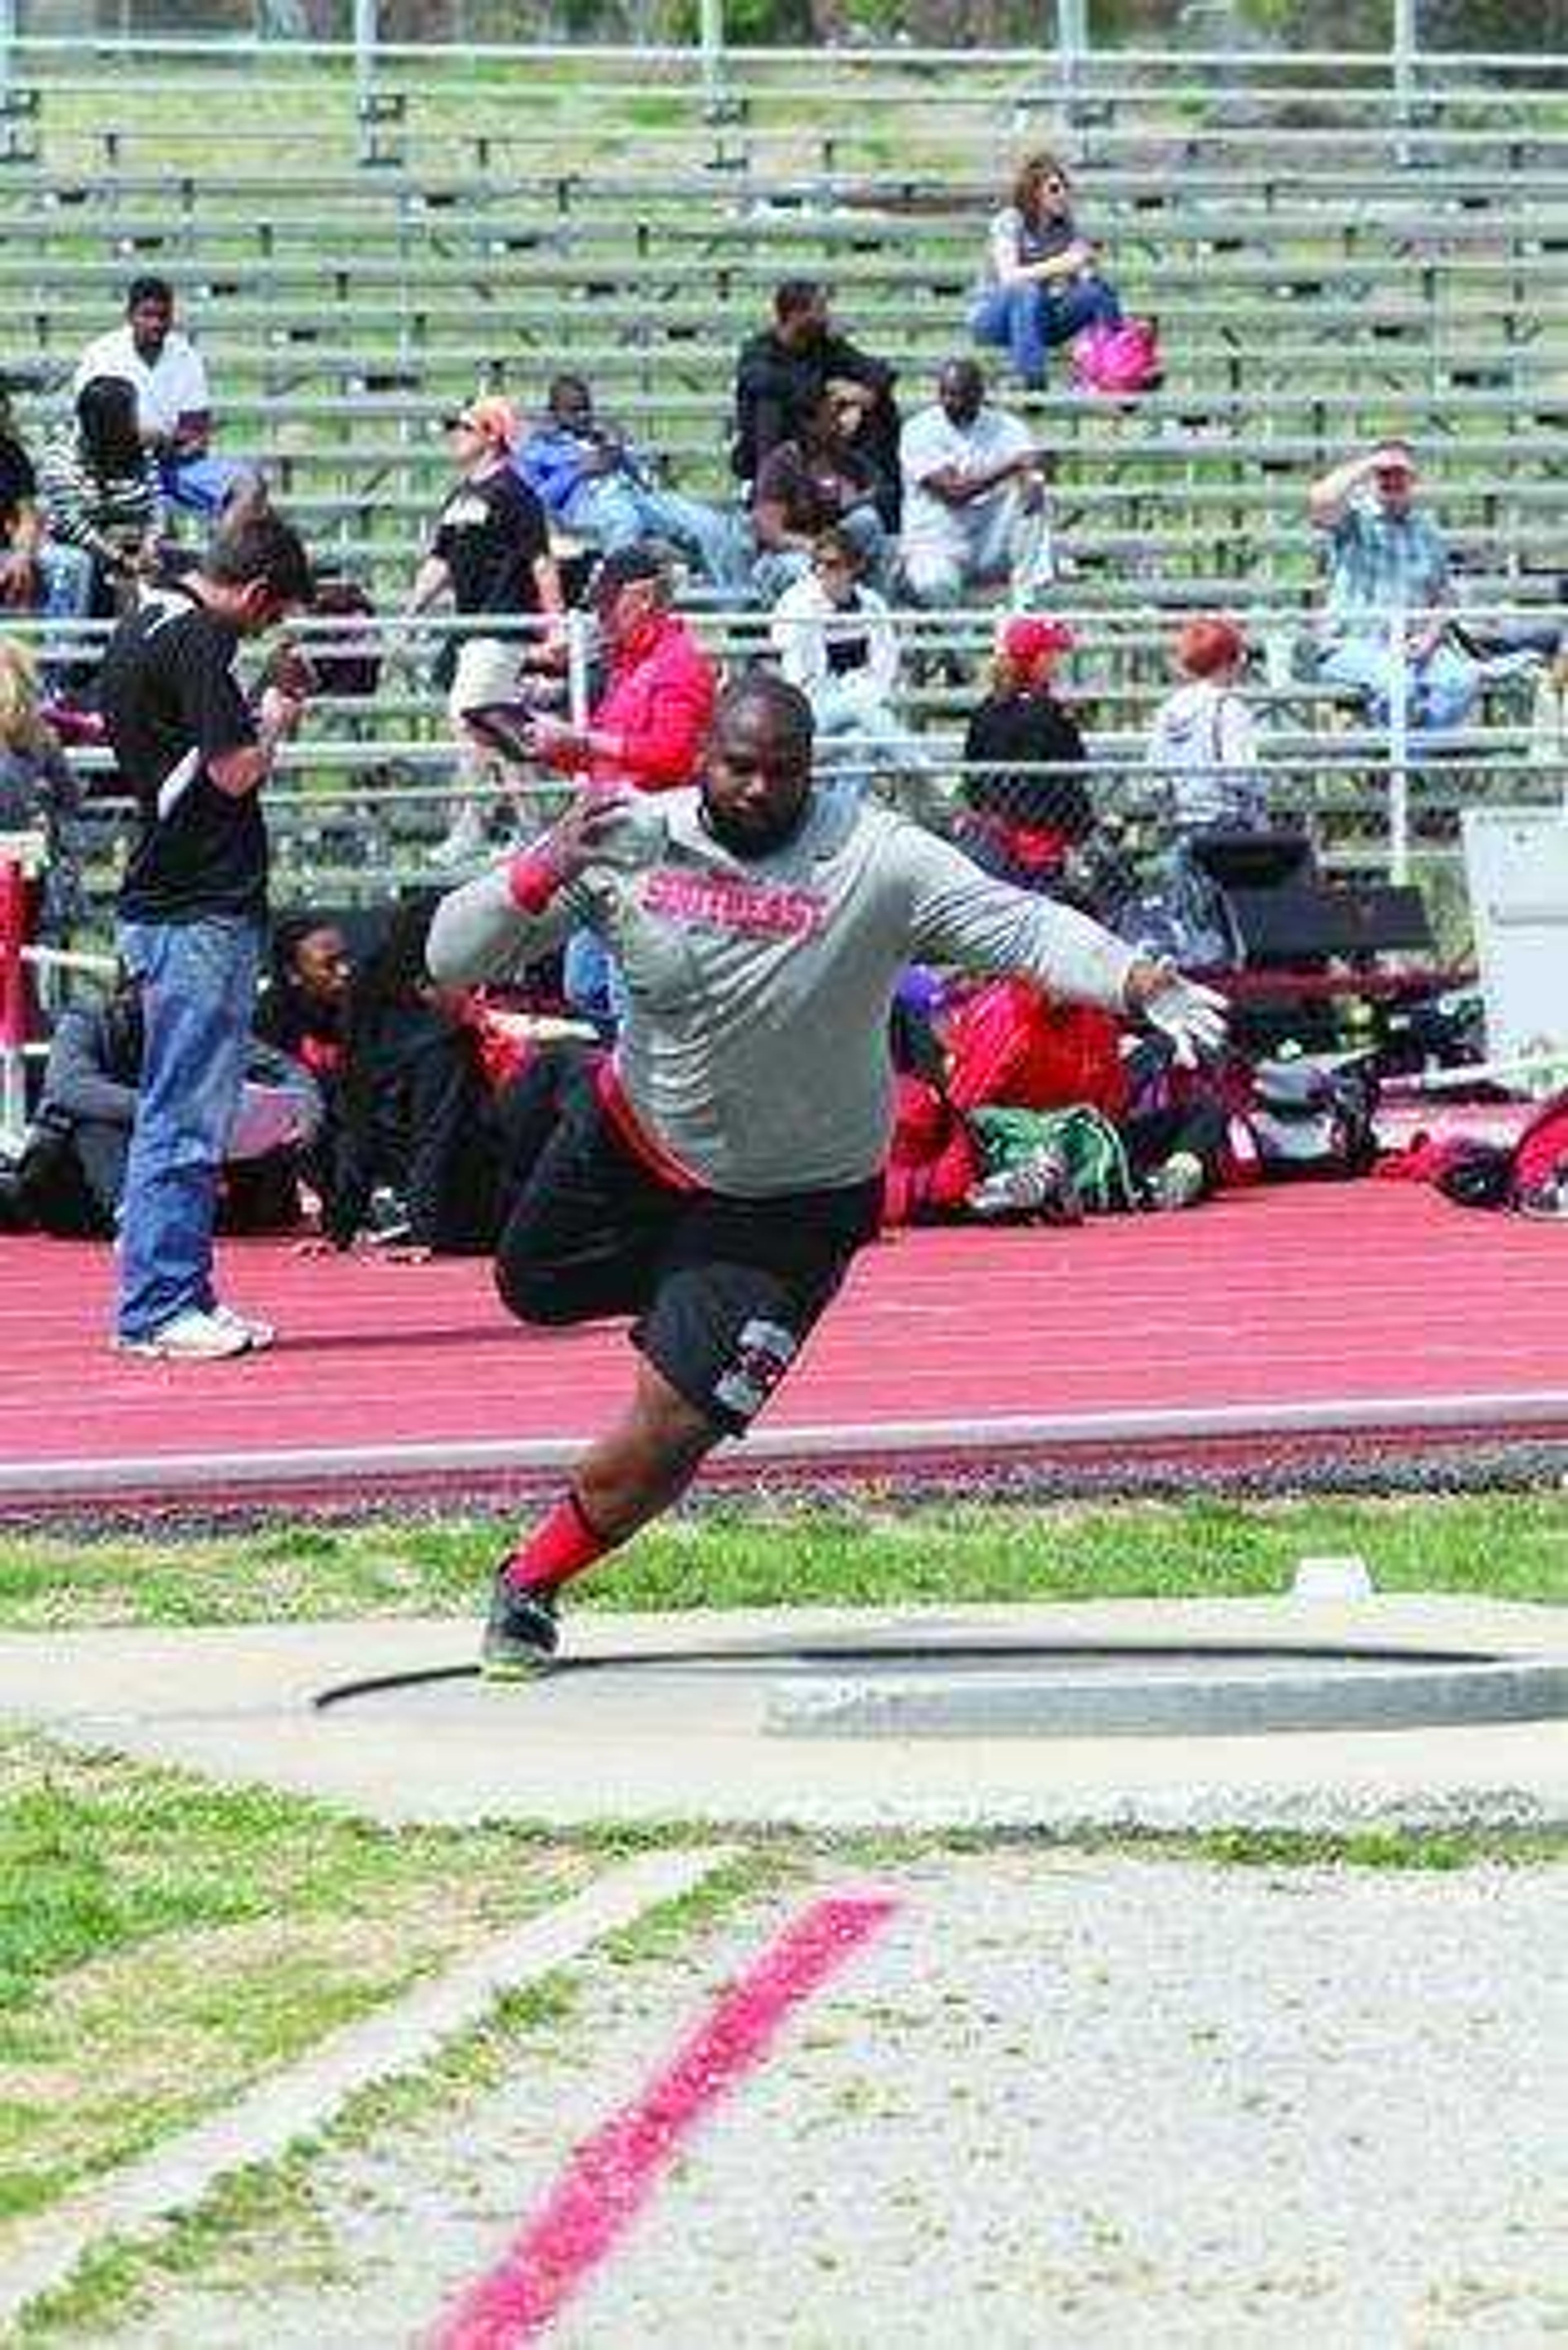 Pair of throwers likely to compete at regionals